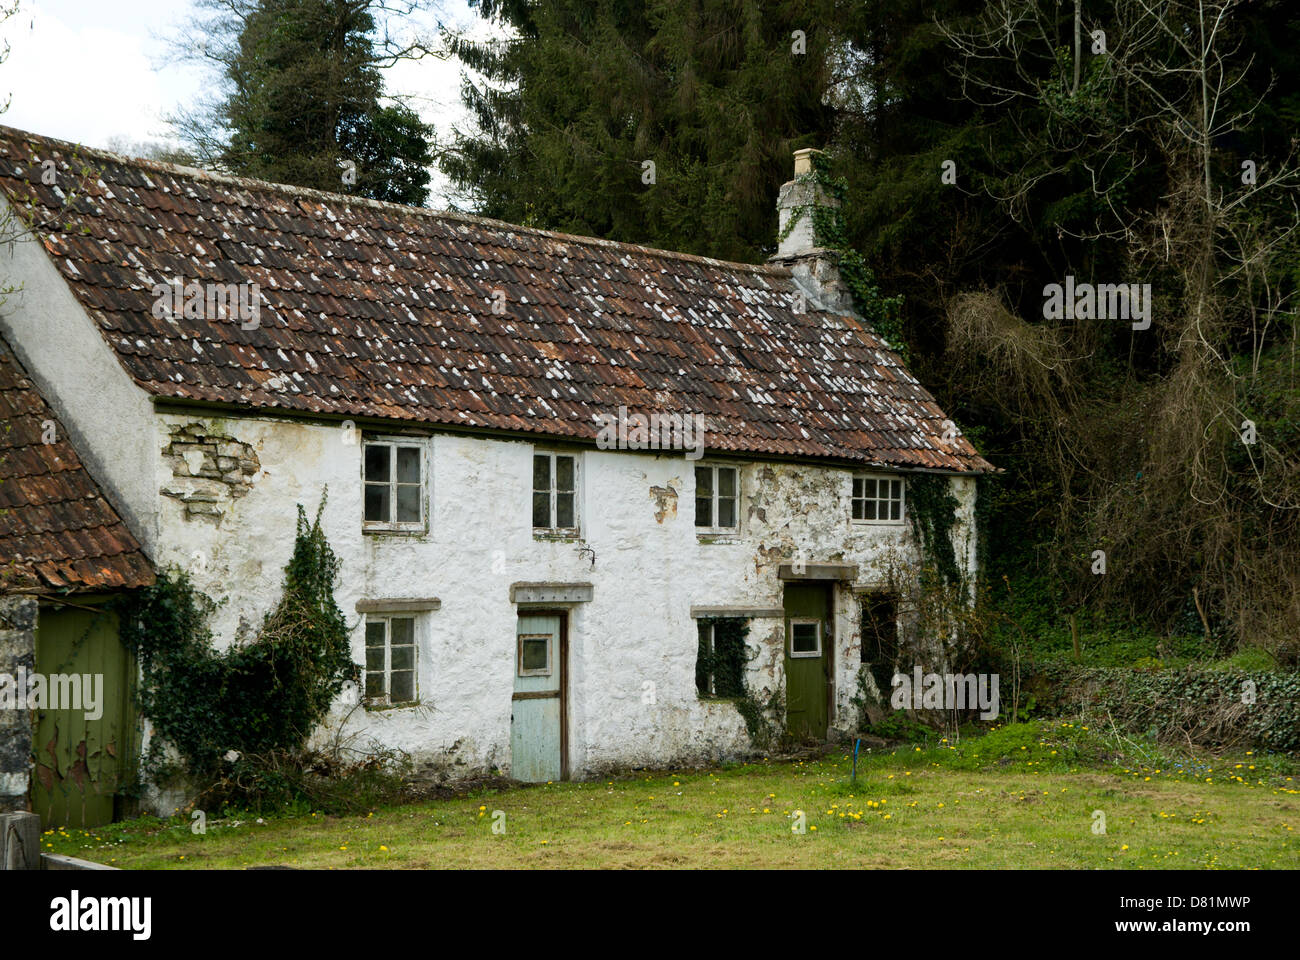 old dilapidated house, tintern, waye valley, monmouthshire, south wales. Stock Photo